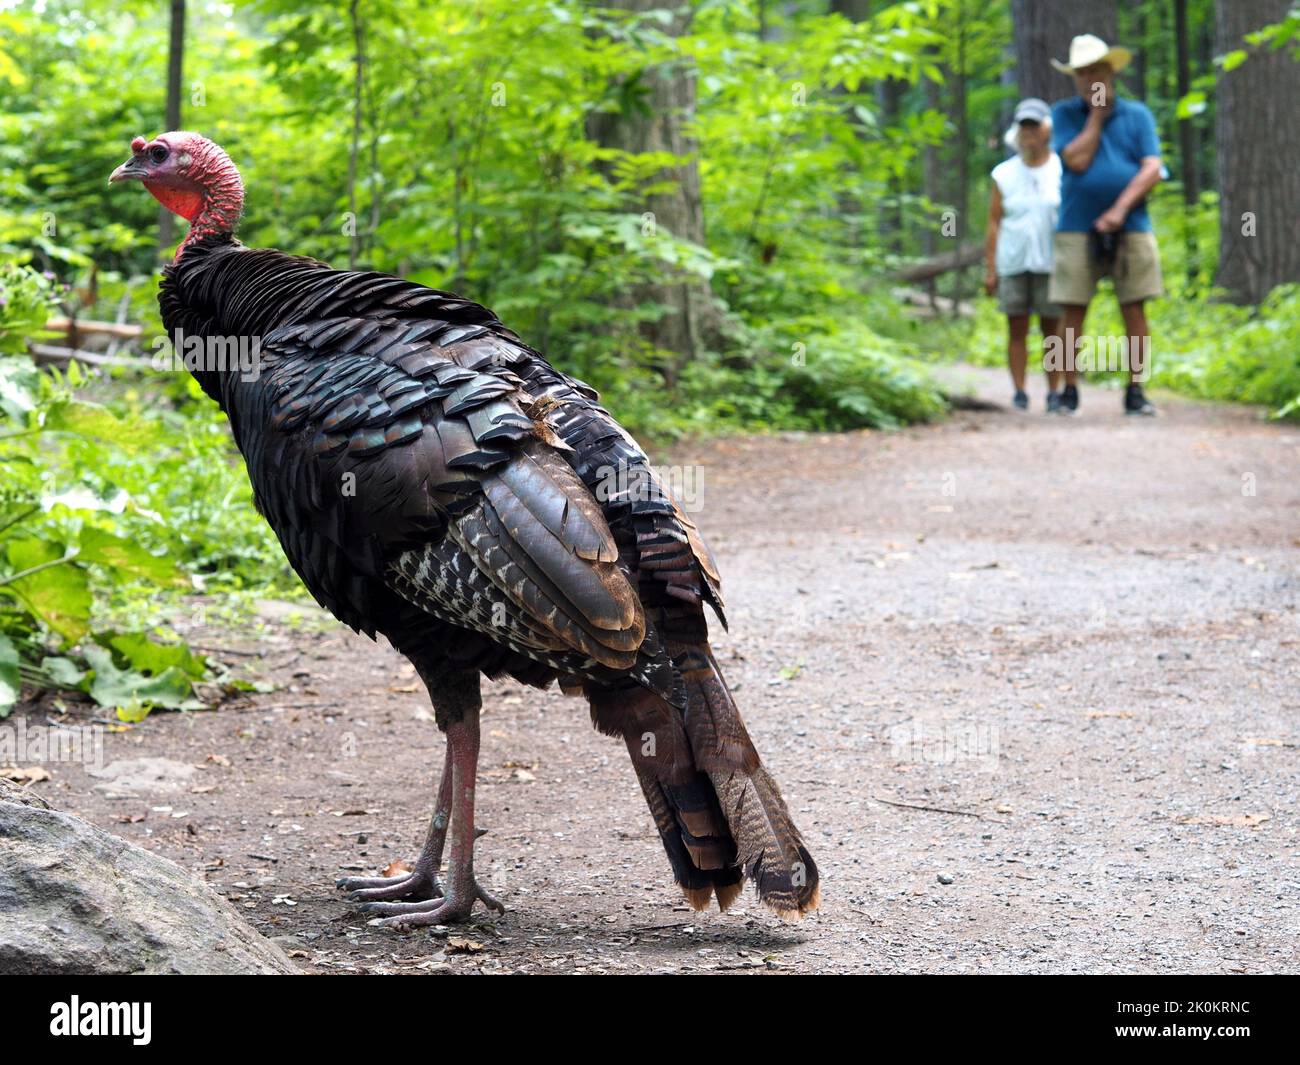 Eastern wild turkey (Meleagris gallopavo) on a nature trail with two hikers observing. Ottawa, ON, Canada. Stock Photo